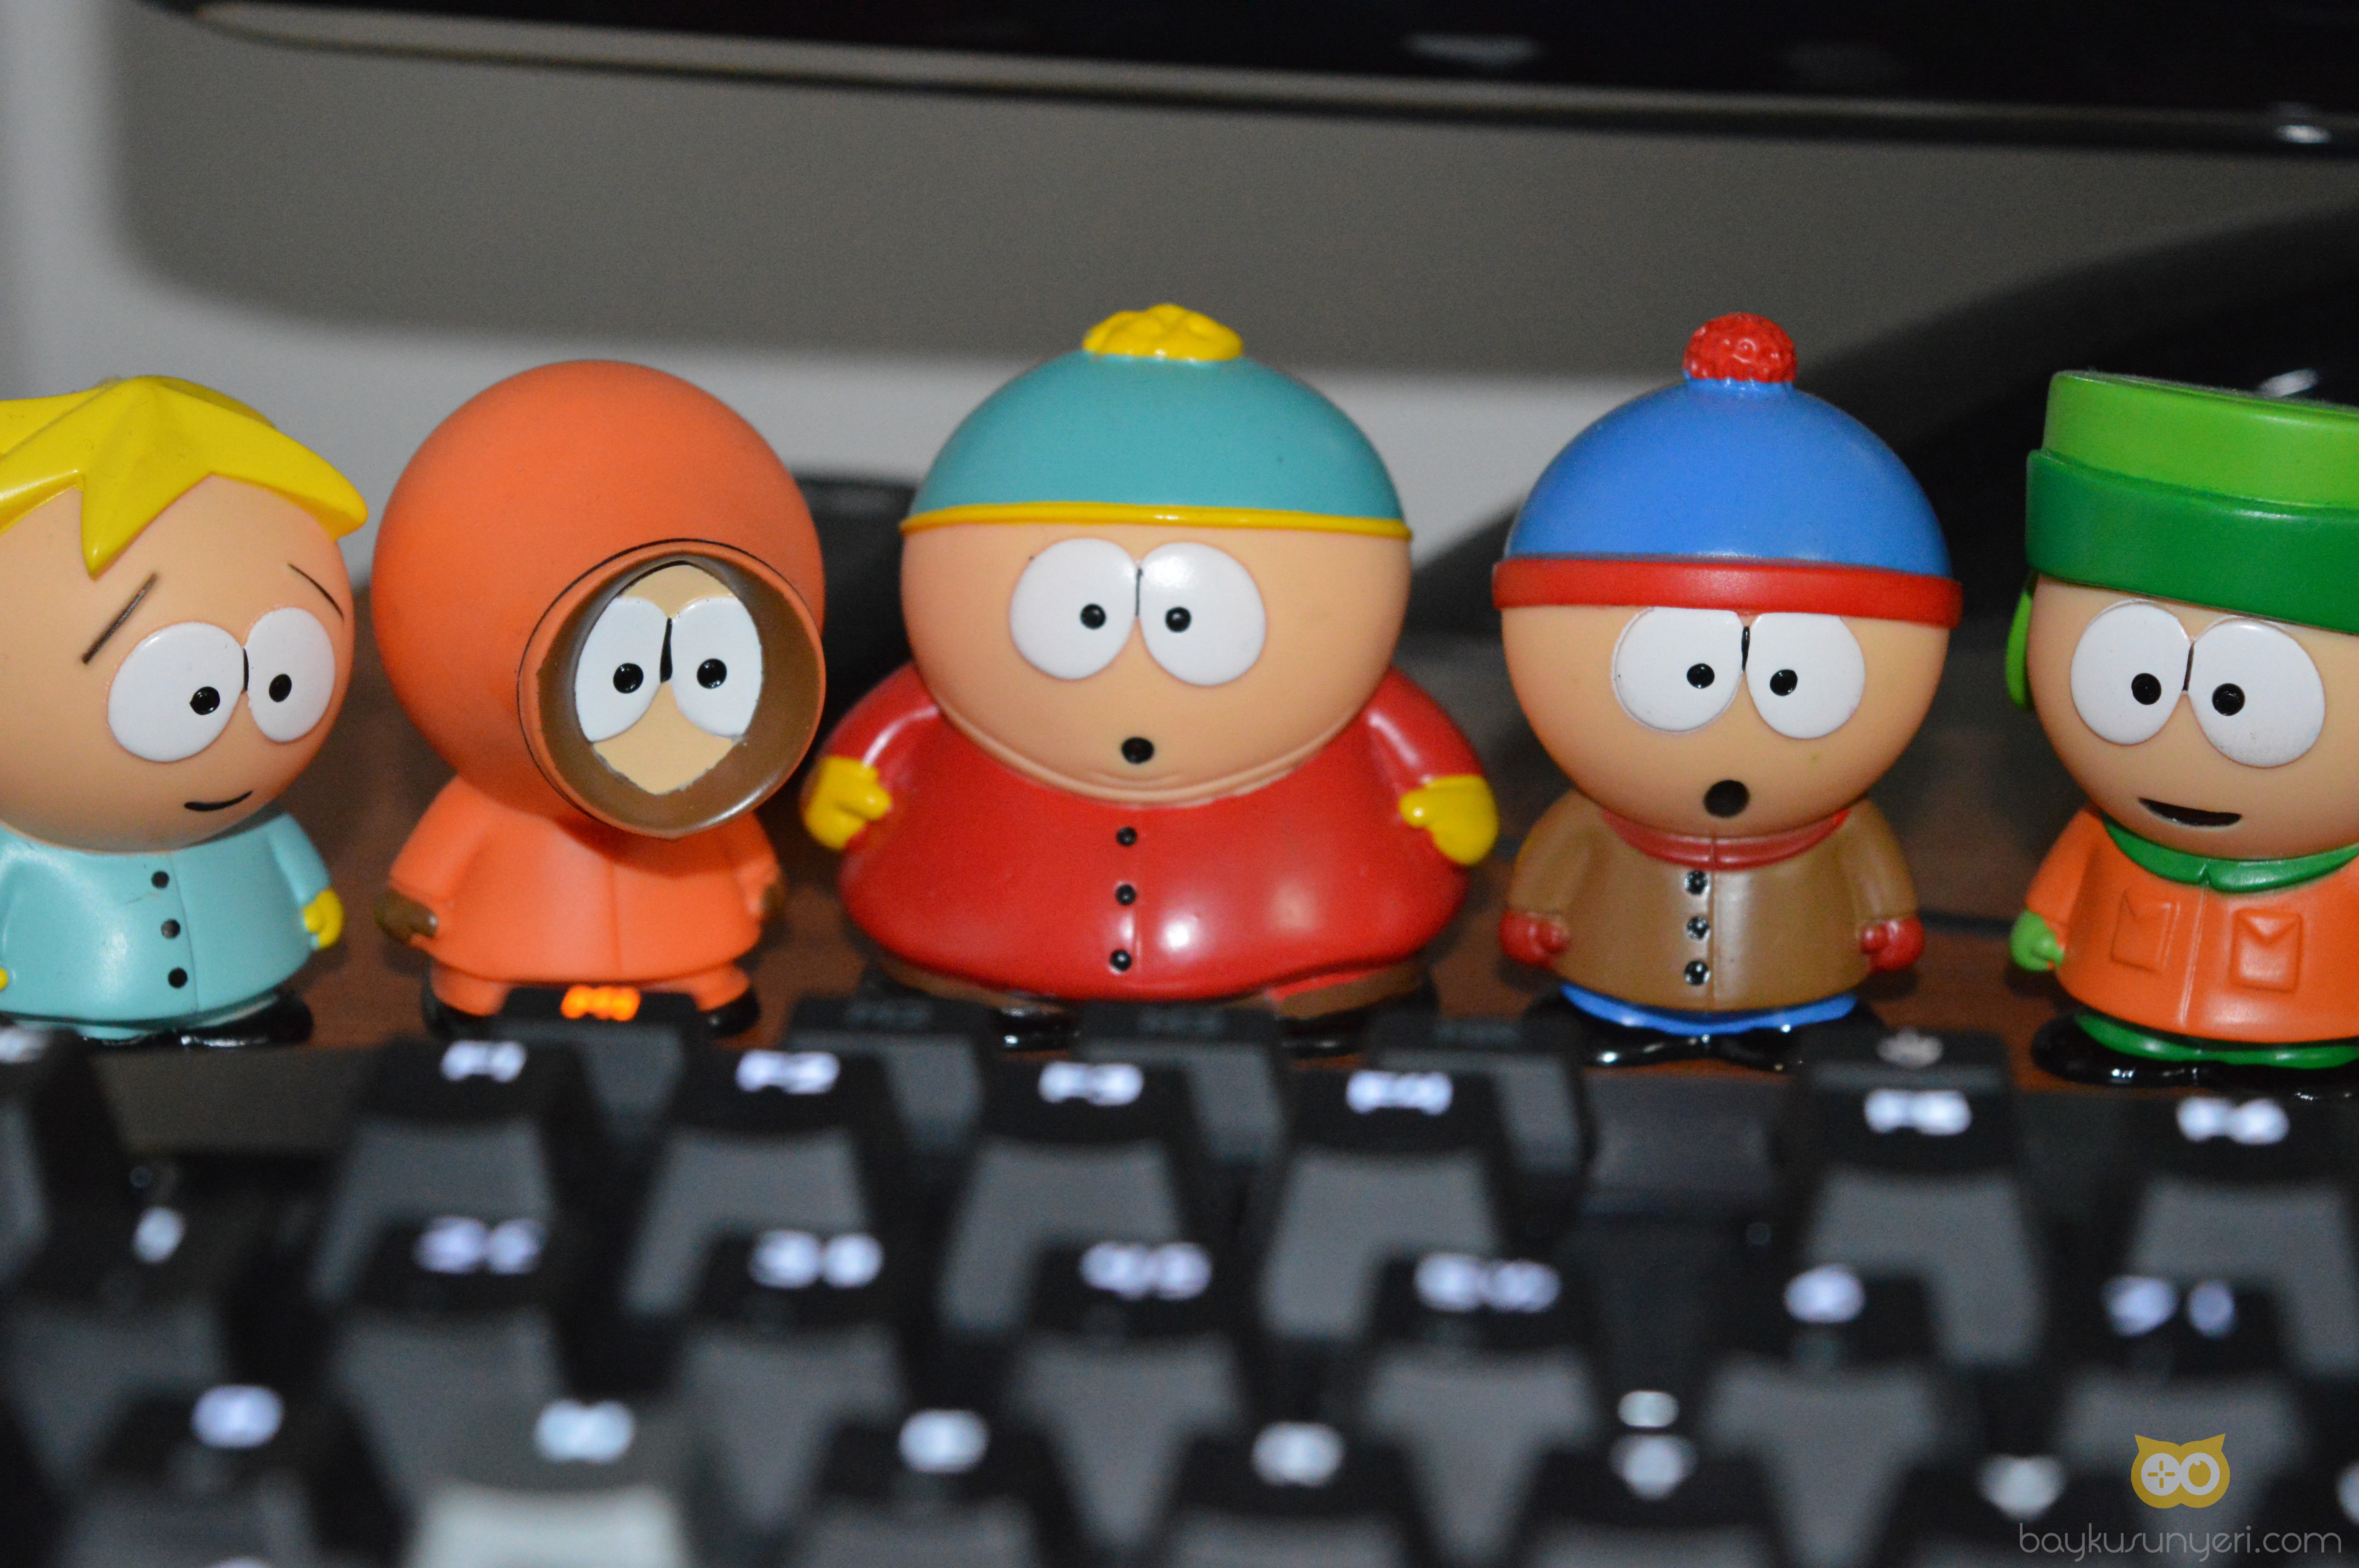 General 6016x4000 keyboards toys South Park closeup miniatures watermarked